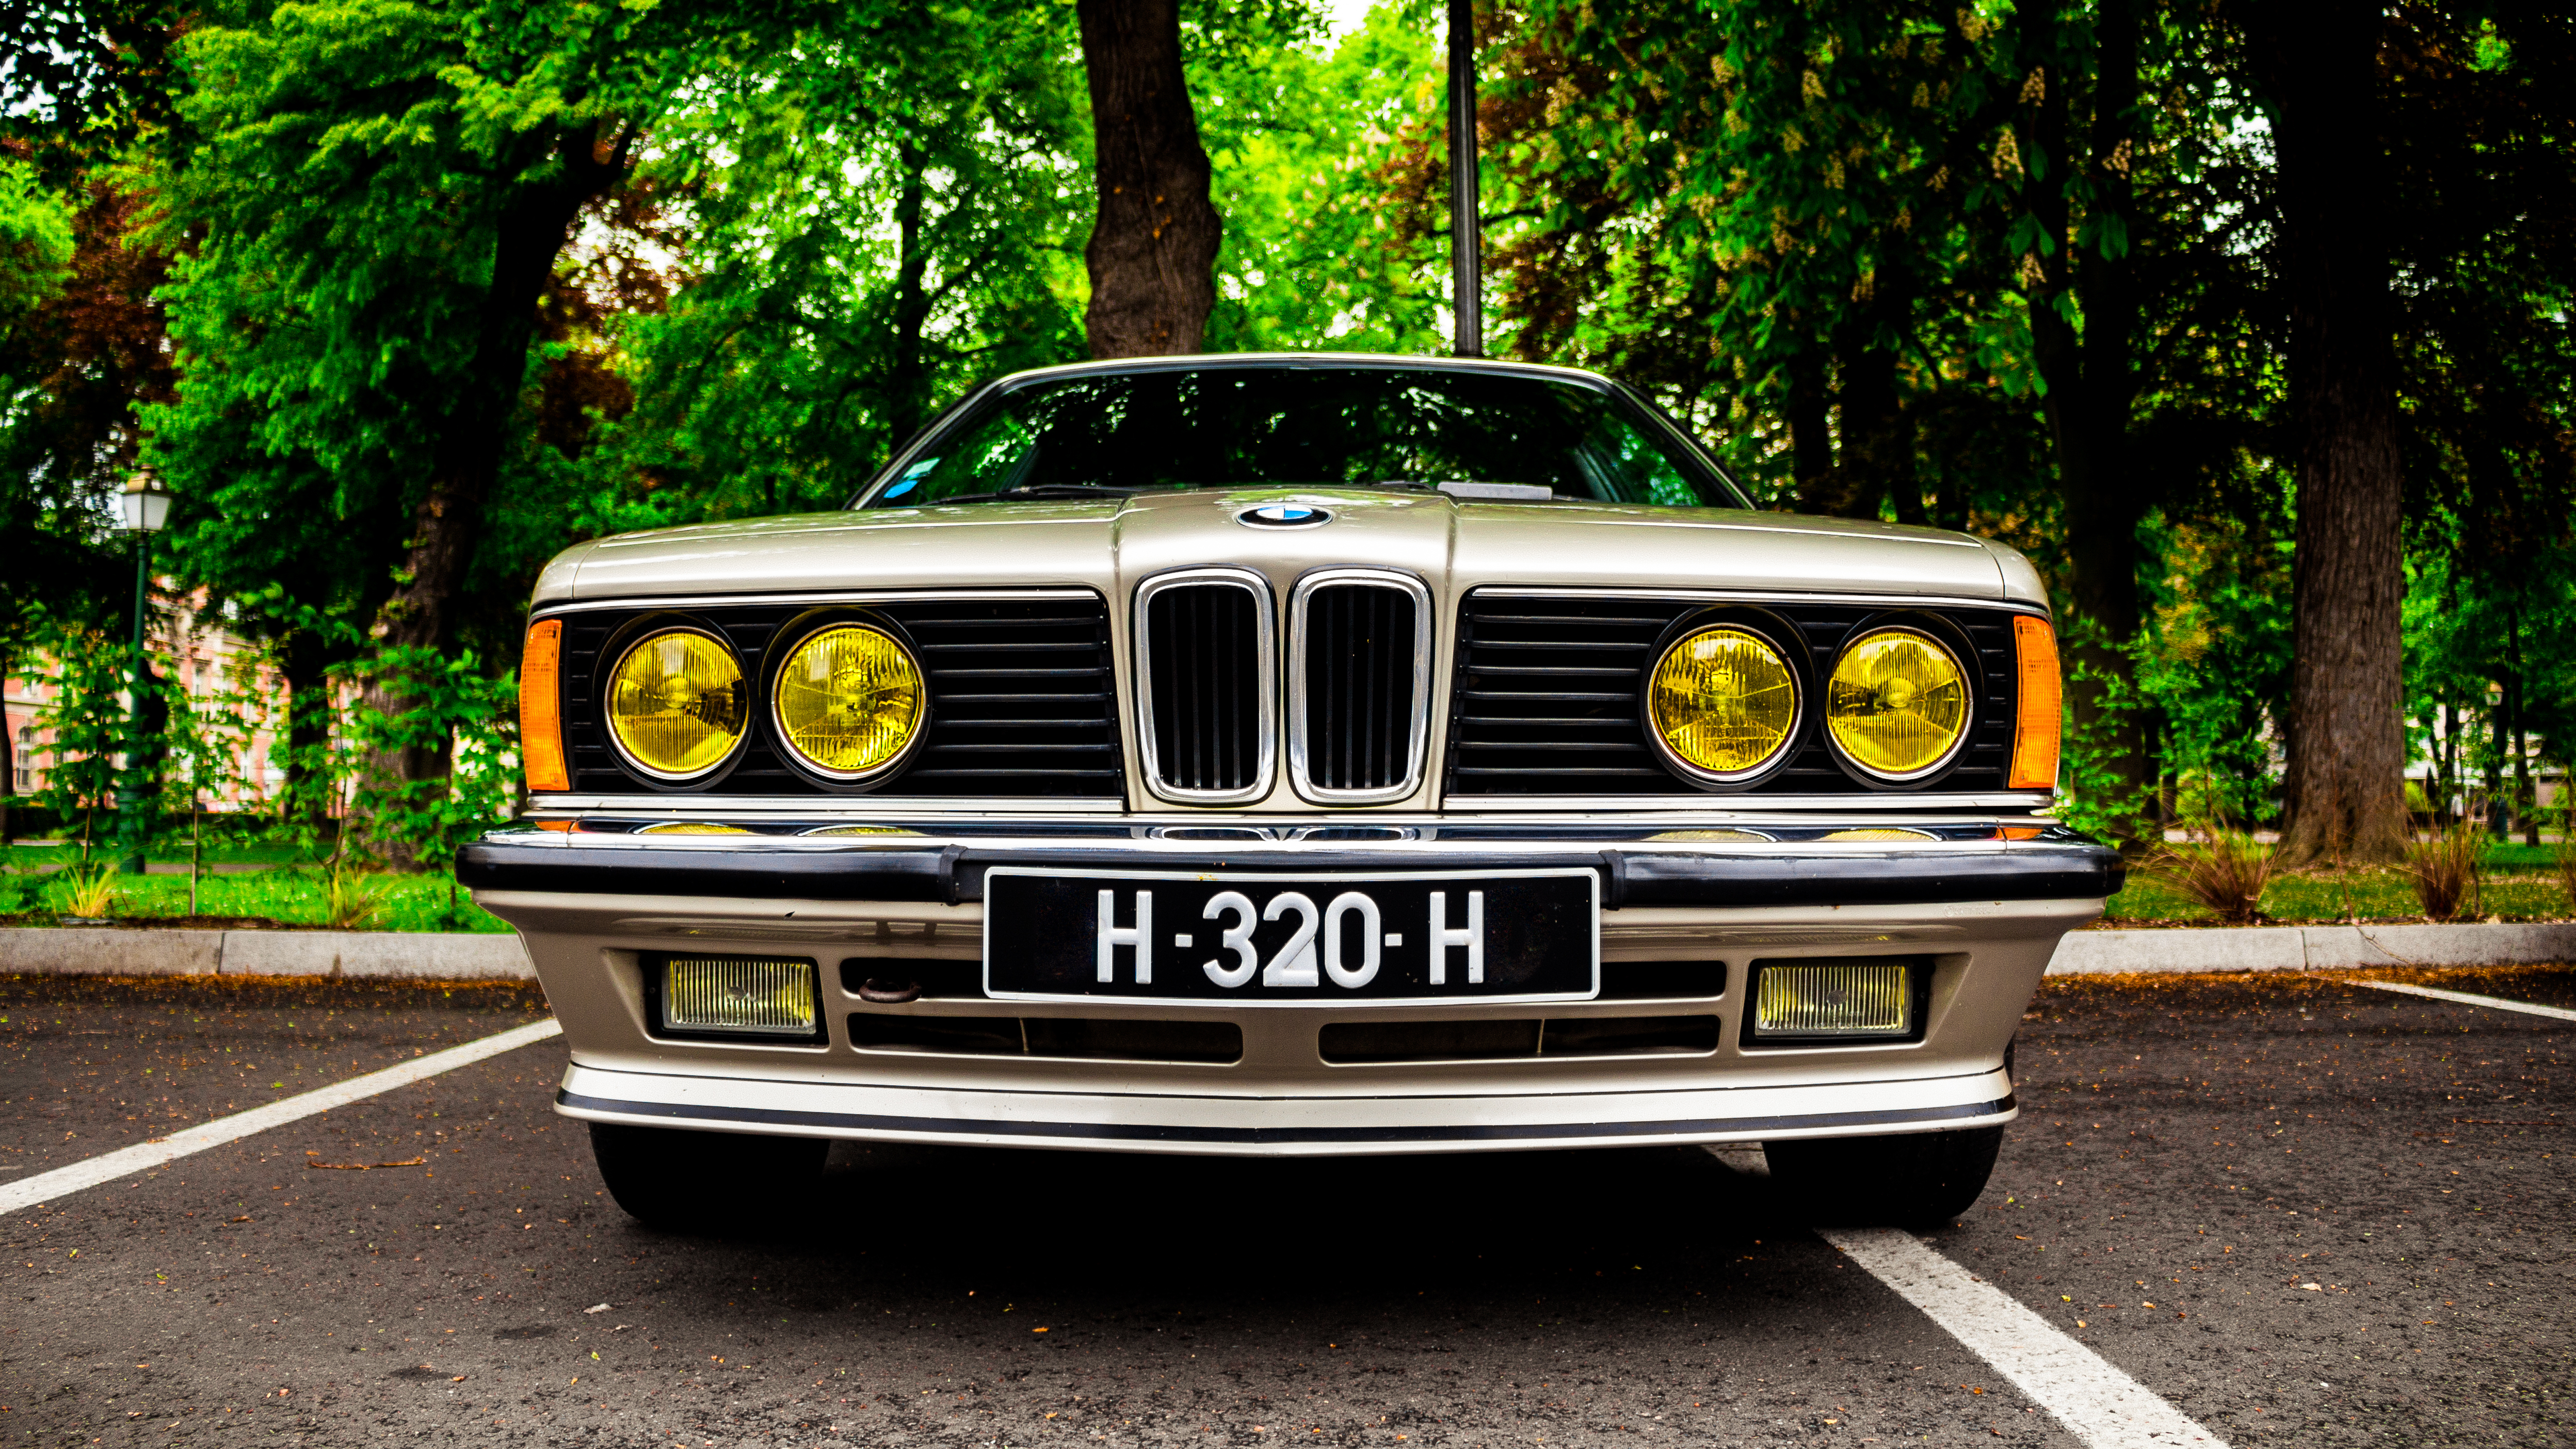 Car BMW Numbers Vehicle BMW E24 BMW 6 Series Frontal View 4992x2808